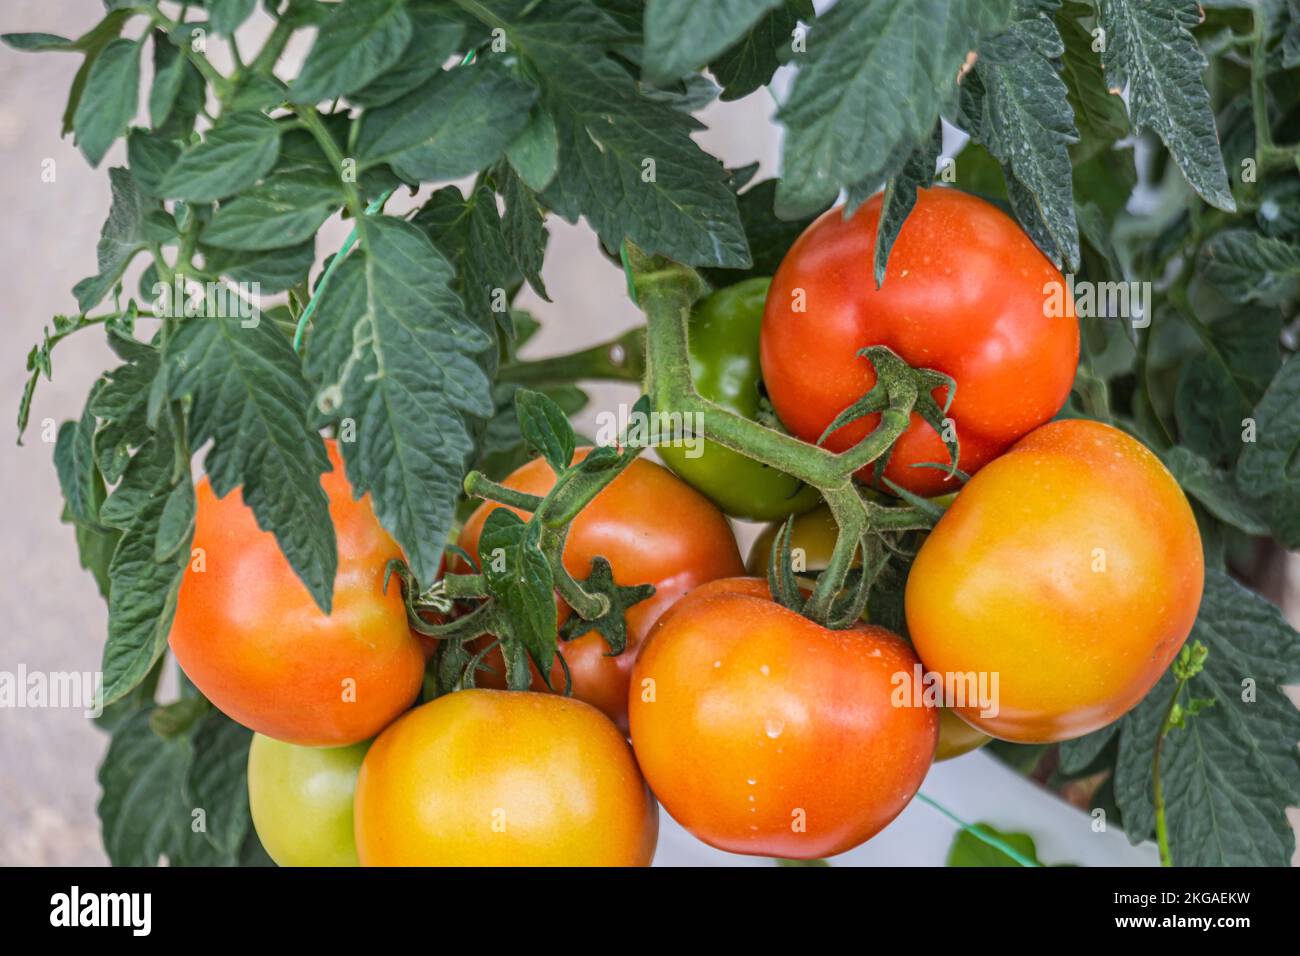 Cluster of tomatoes on the vine at the farm in colder highland region of Cameron Highlands, Malaysia. Stock Photo